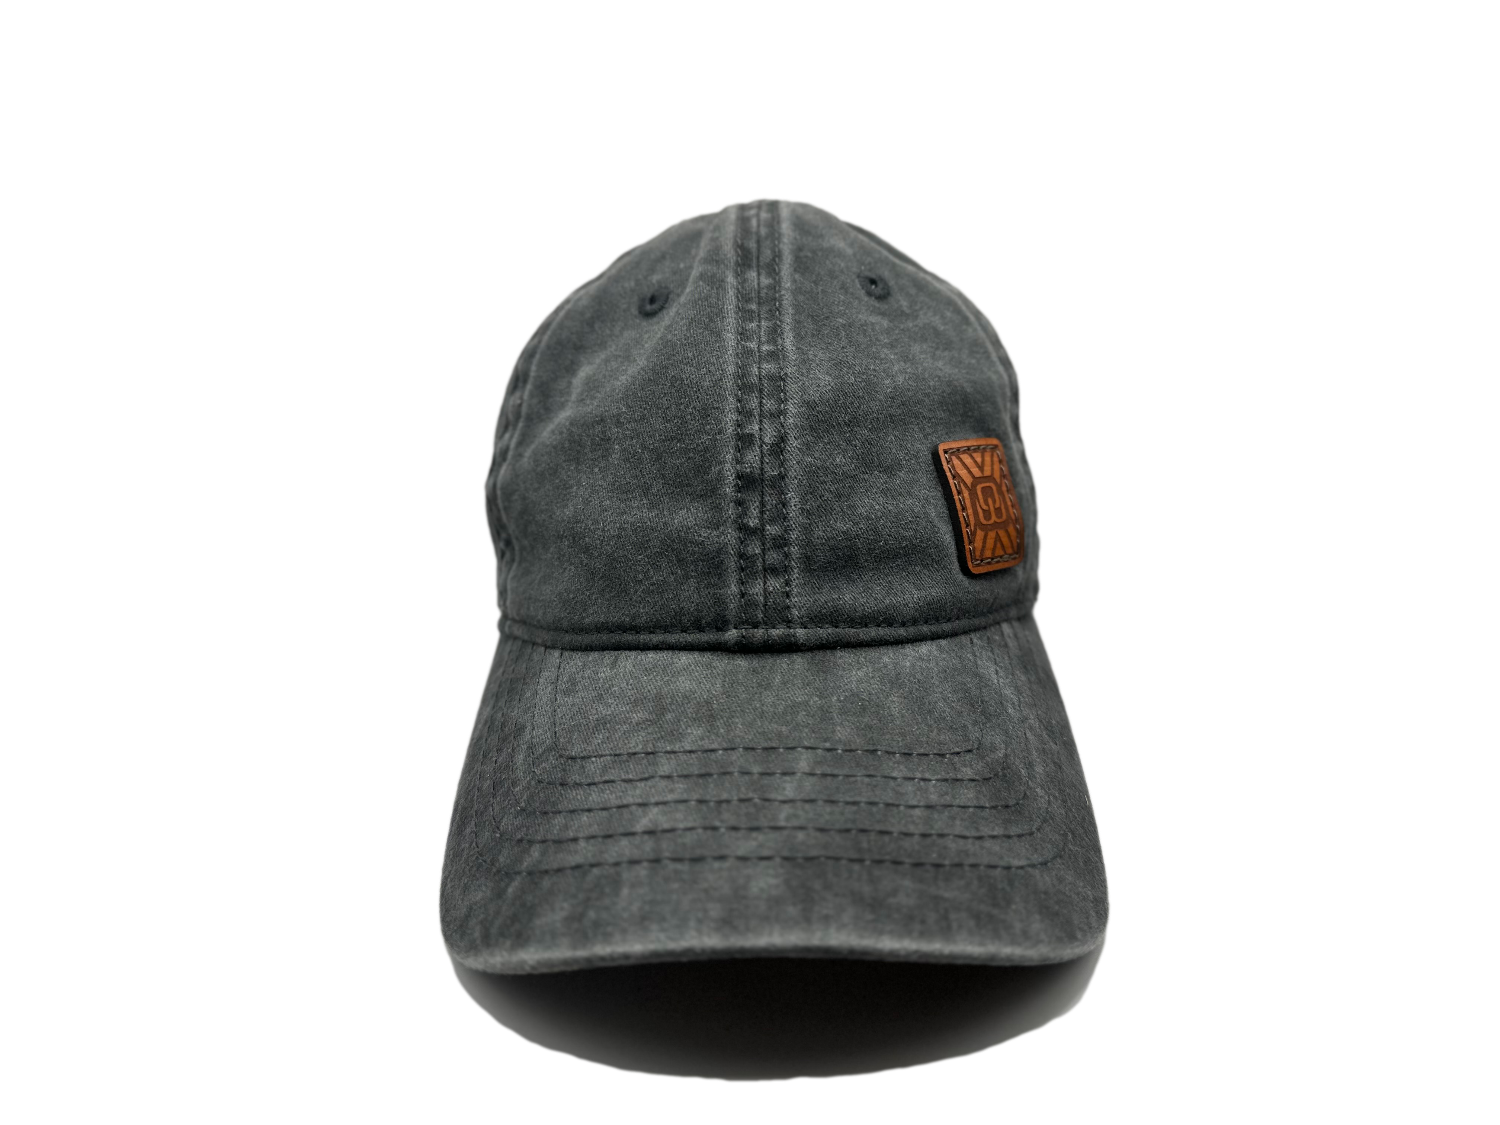 Women's baseball hat with leather patch. Our custom designed leather patch is laser engraved and sewn onto a women's cap. We use full-grain, veg tanned leather. Women's hats have a hidden pony tail opening and makeup resistant band.